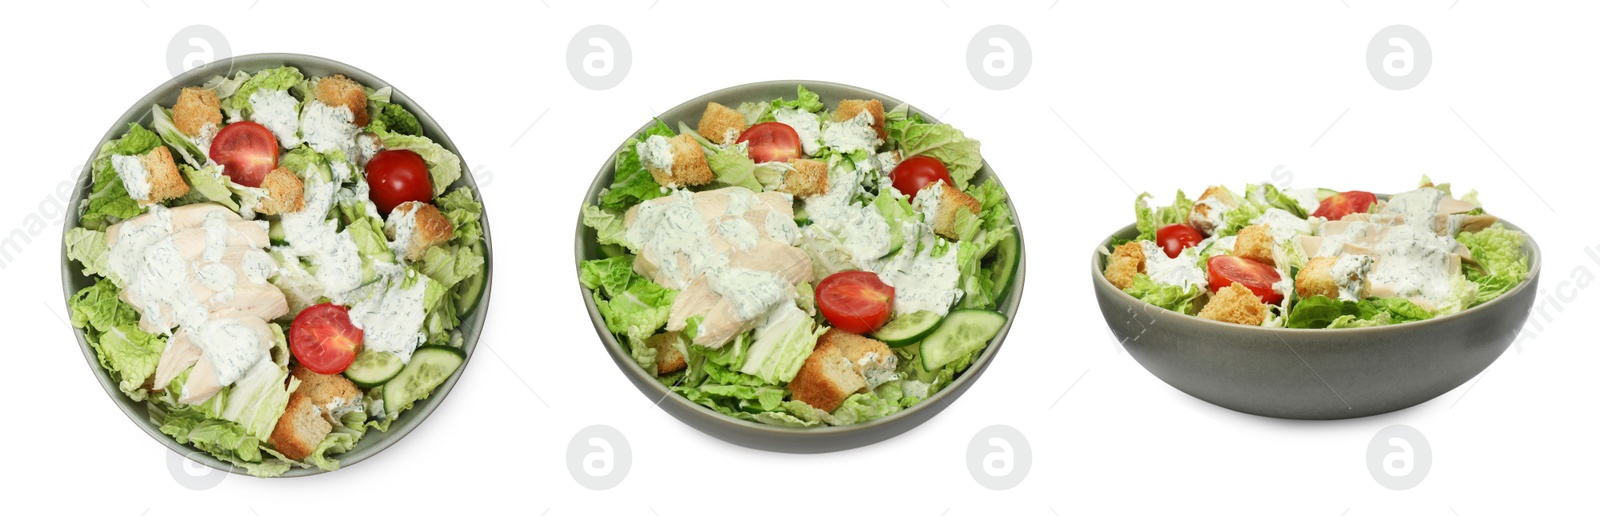 Image of Bowl of tasty salad with Chinese cabbage, cucumber, meat and tomatoes on white background, different sides. Collage design